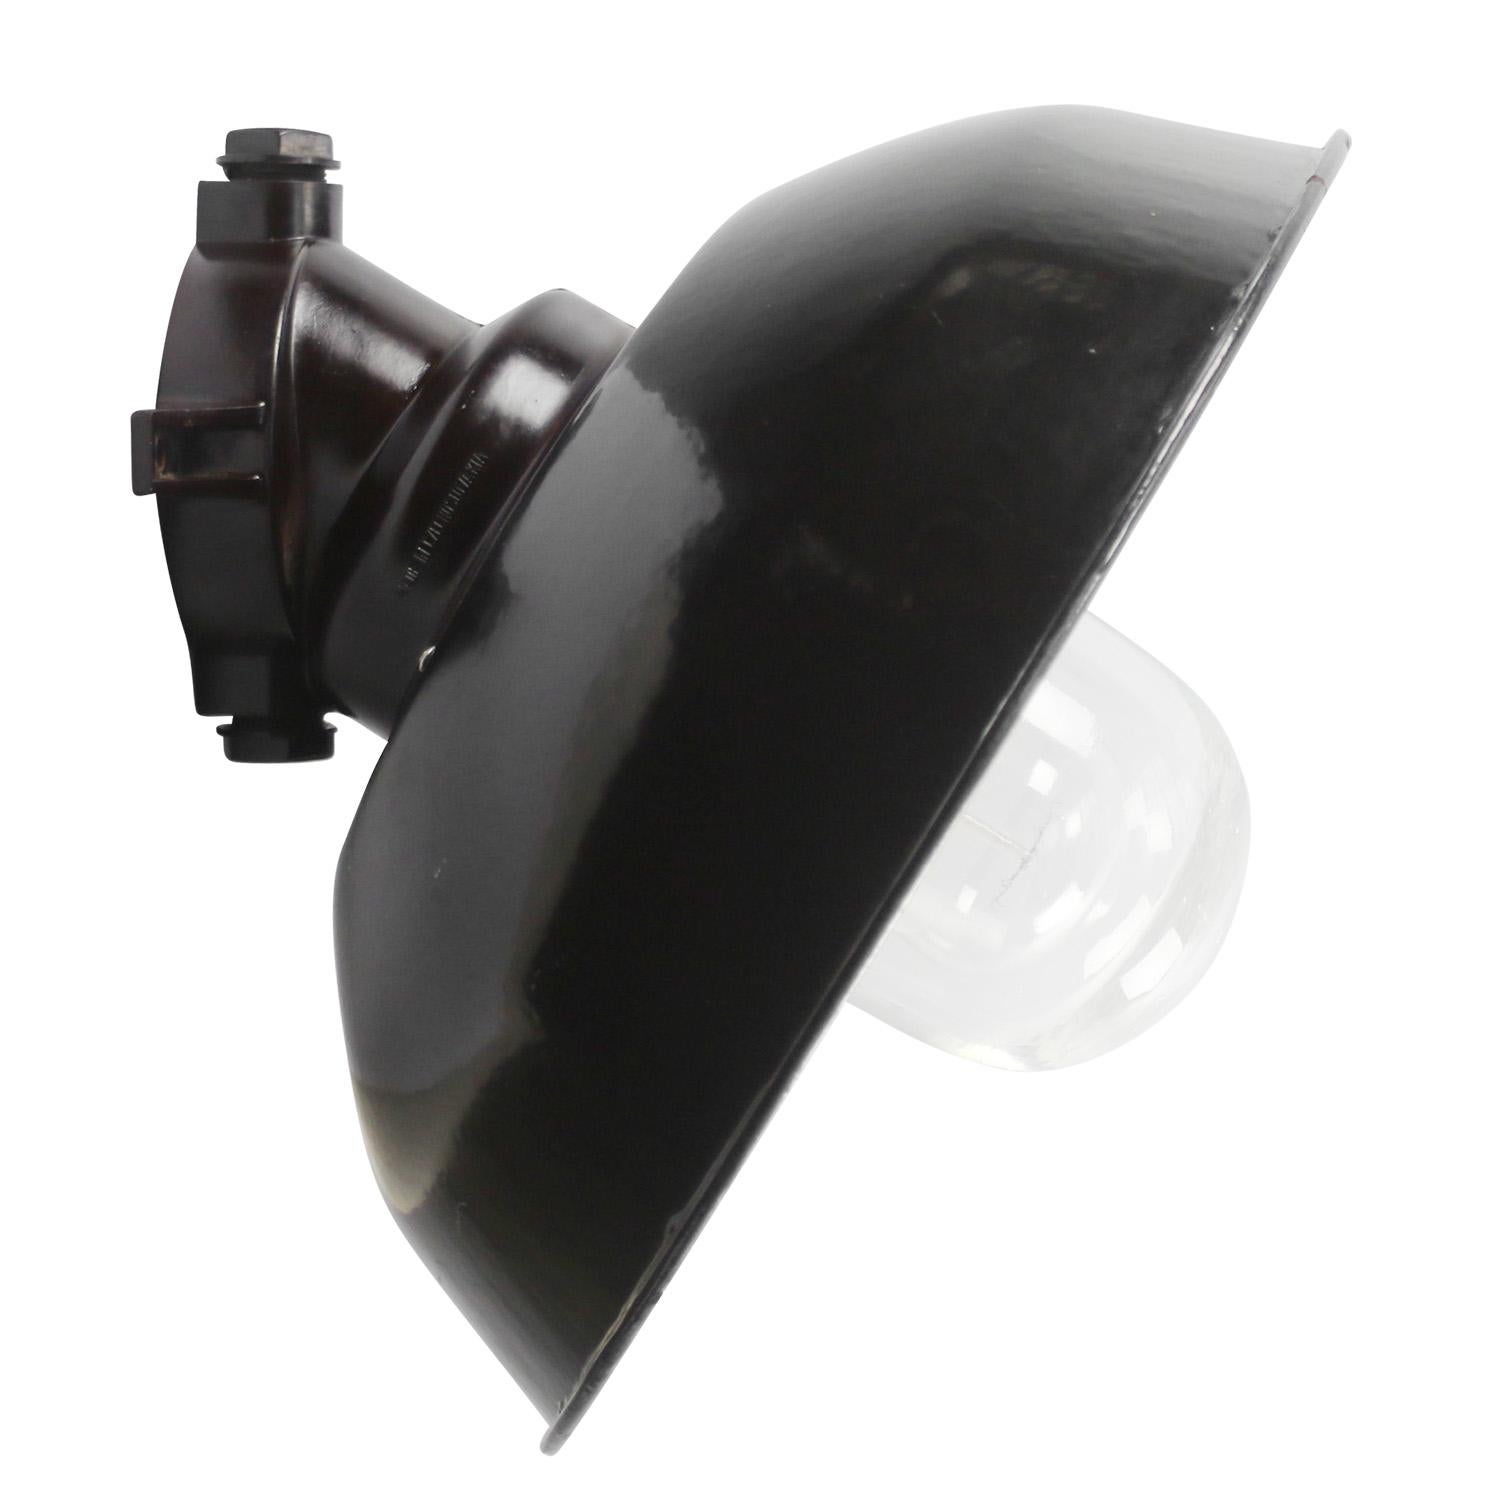 Industrial wall light.
Black enamel white interior.
Bakelite wall mount.
Clear glass.

Weight: 2.00 kg / 4.4 lb

riced per individual item. All lamps have been made suitable by international standards for incandescent light bulbs, energy-efficient